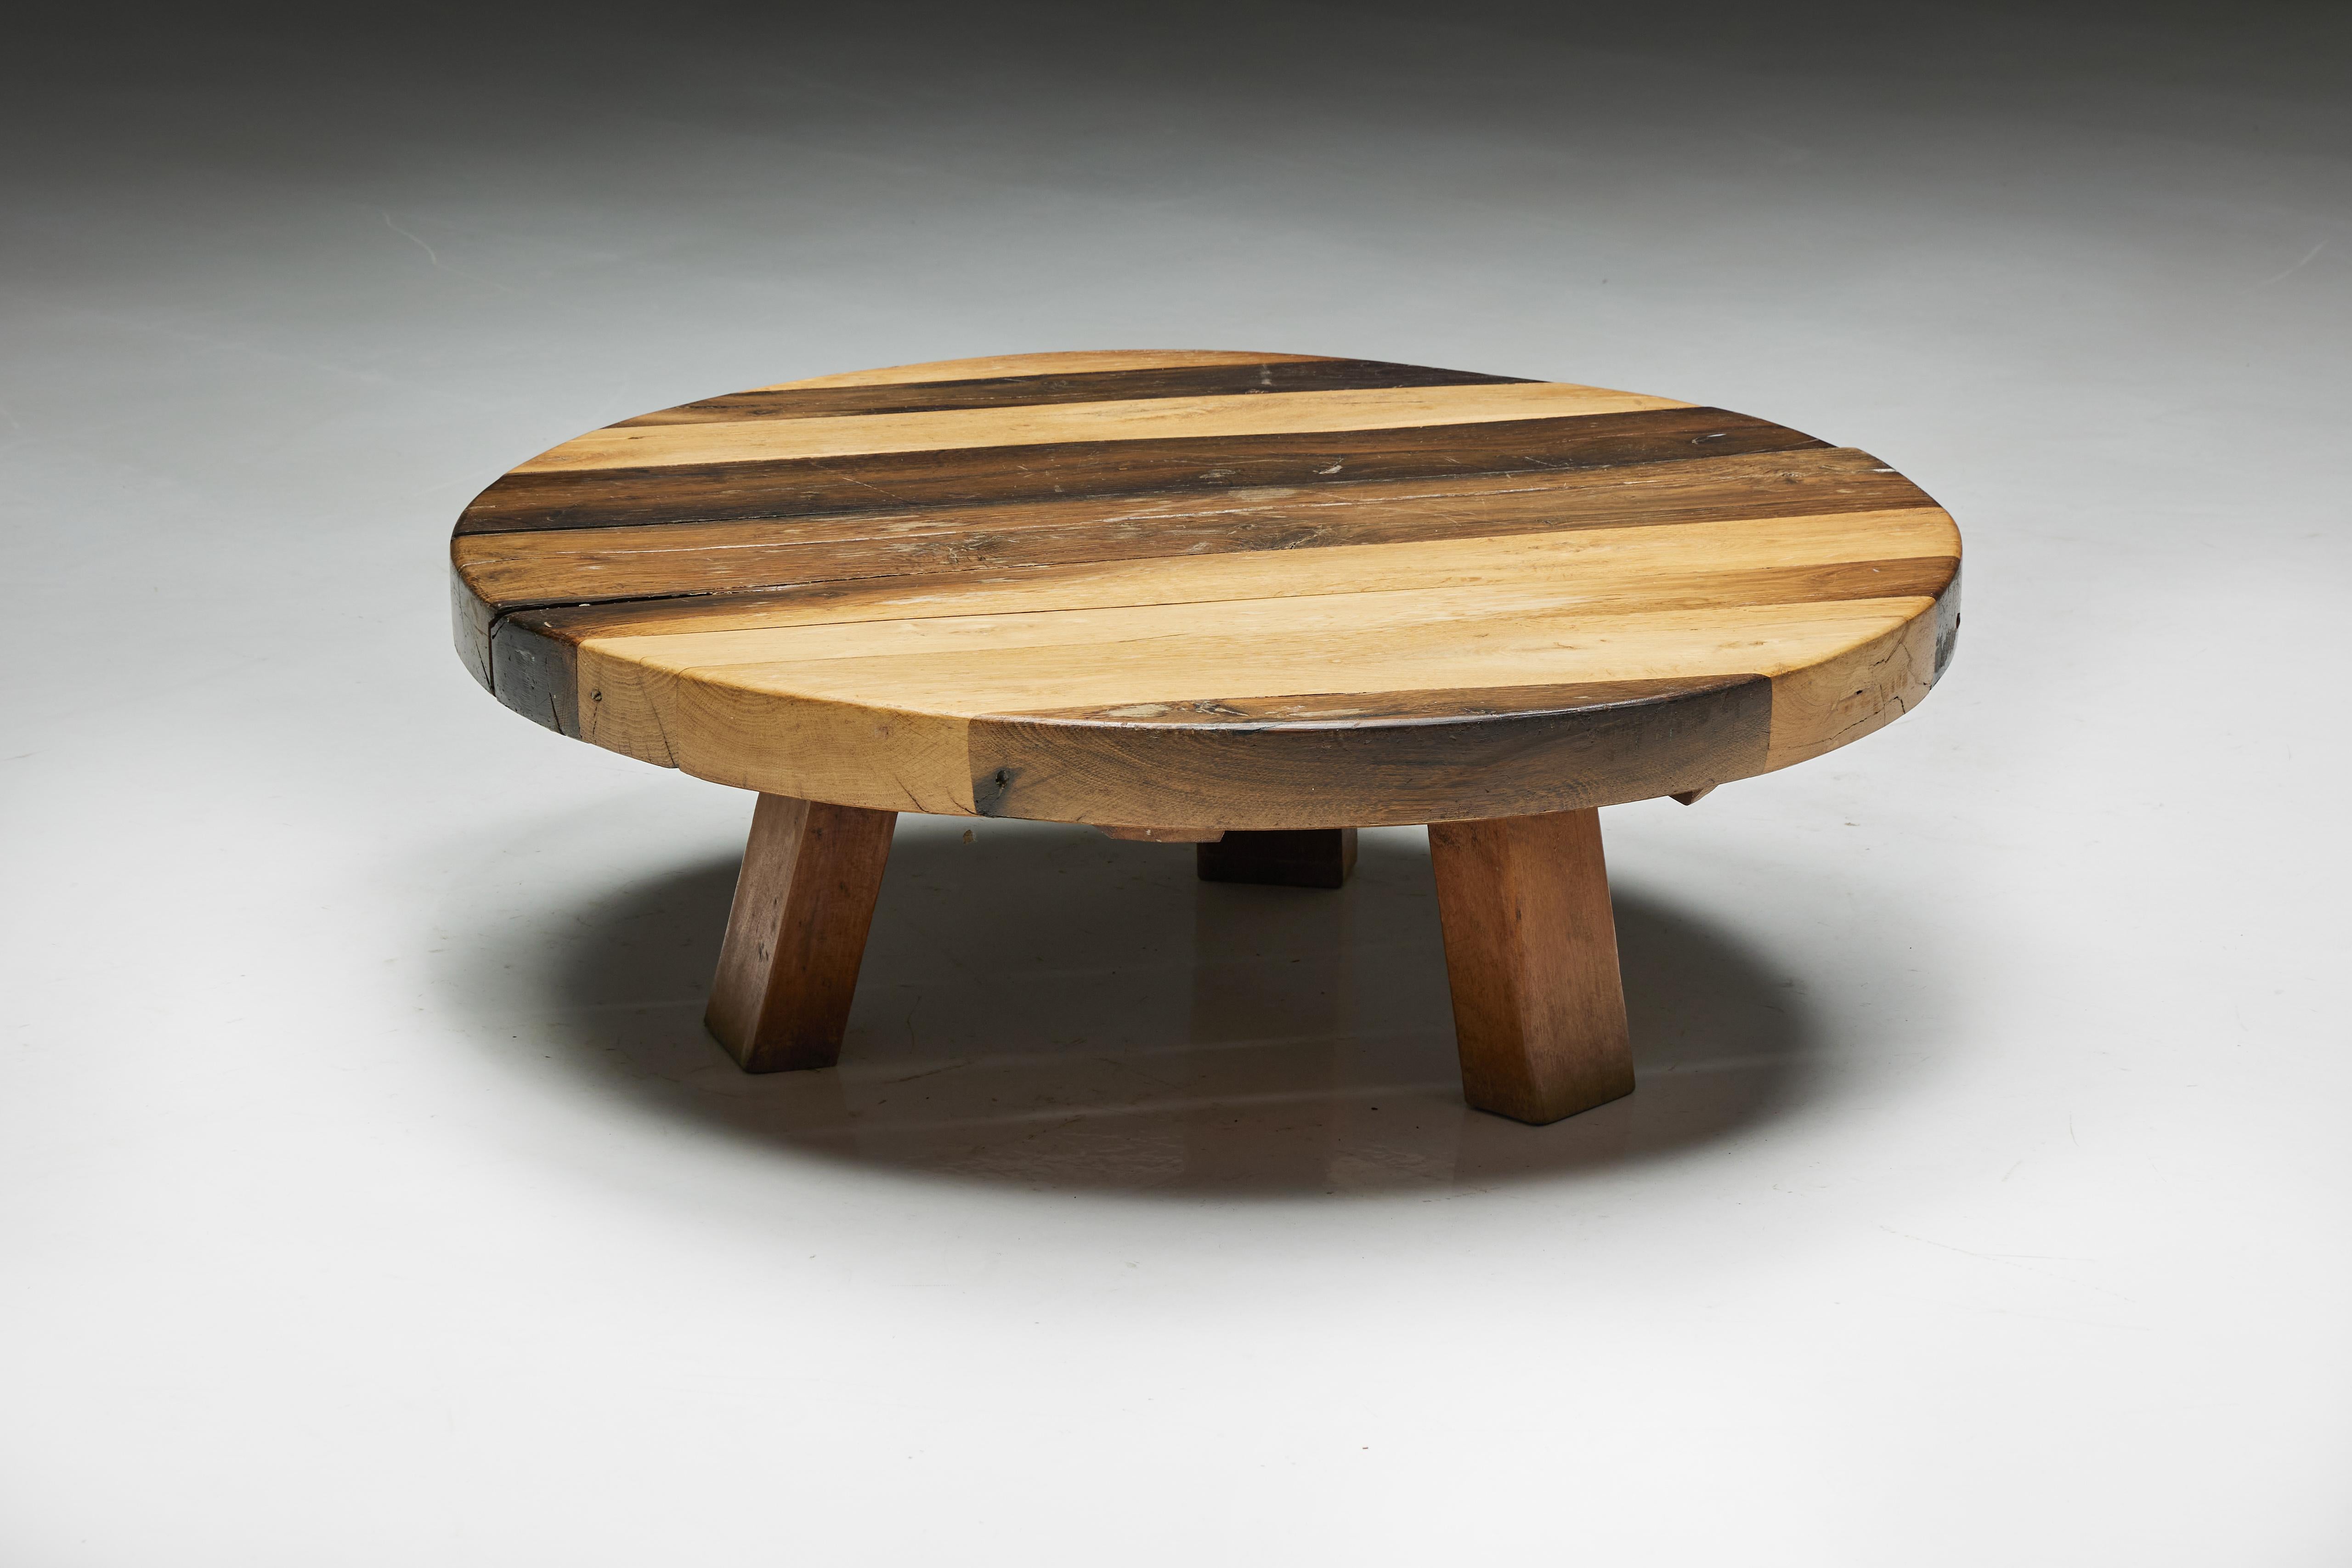 Brutalist Round Artisan Wooden Coffee Table, France, 1950s For Sale